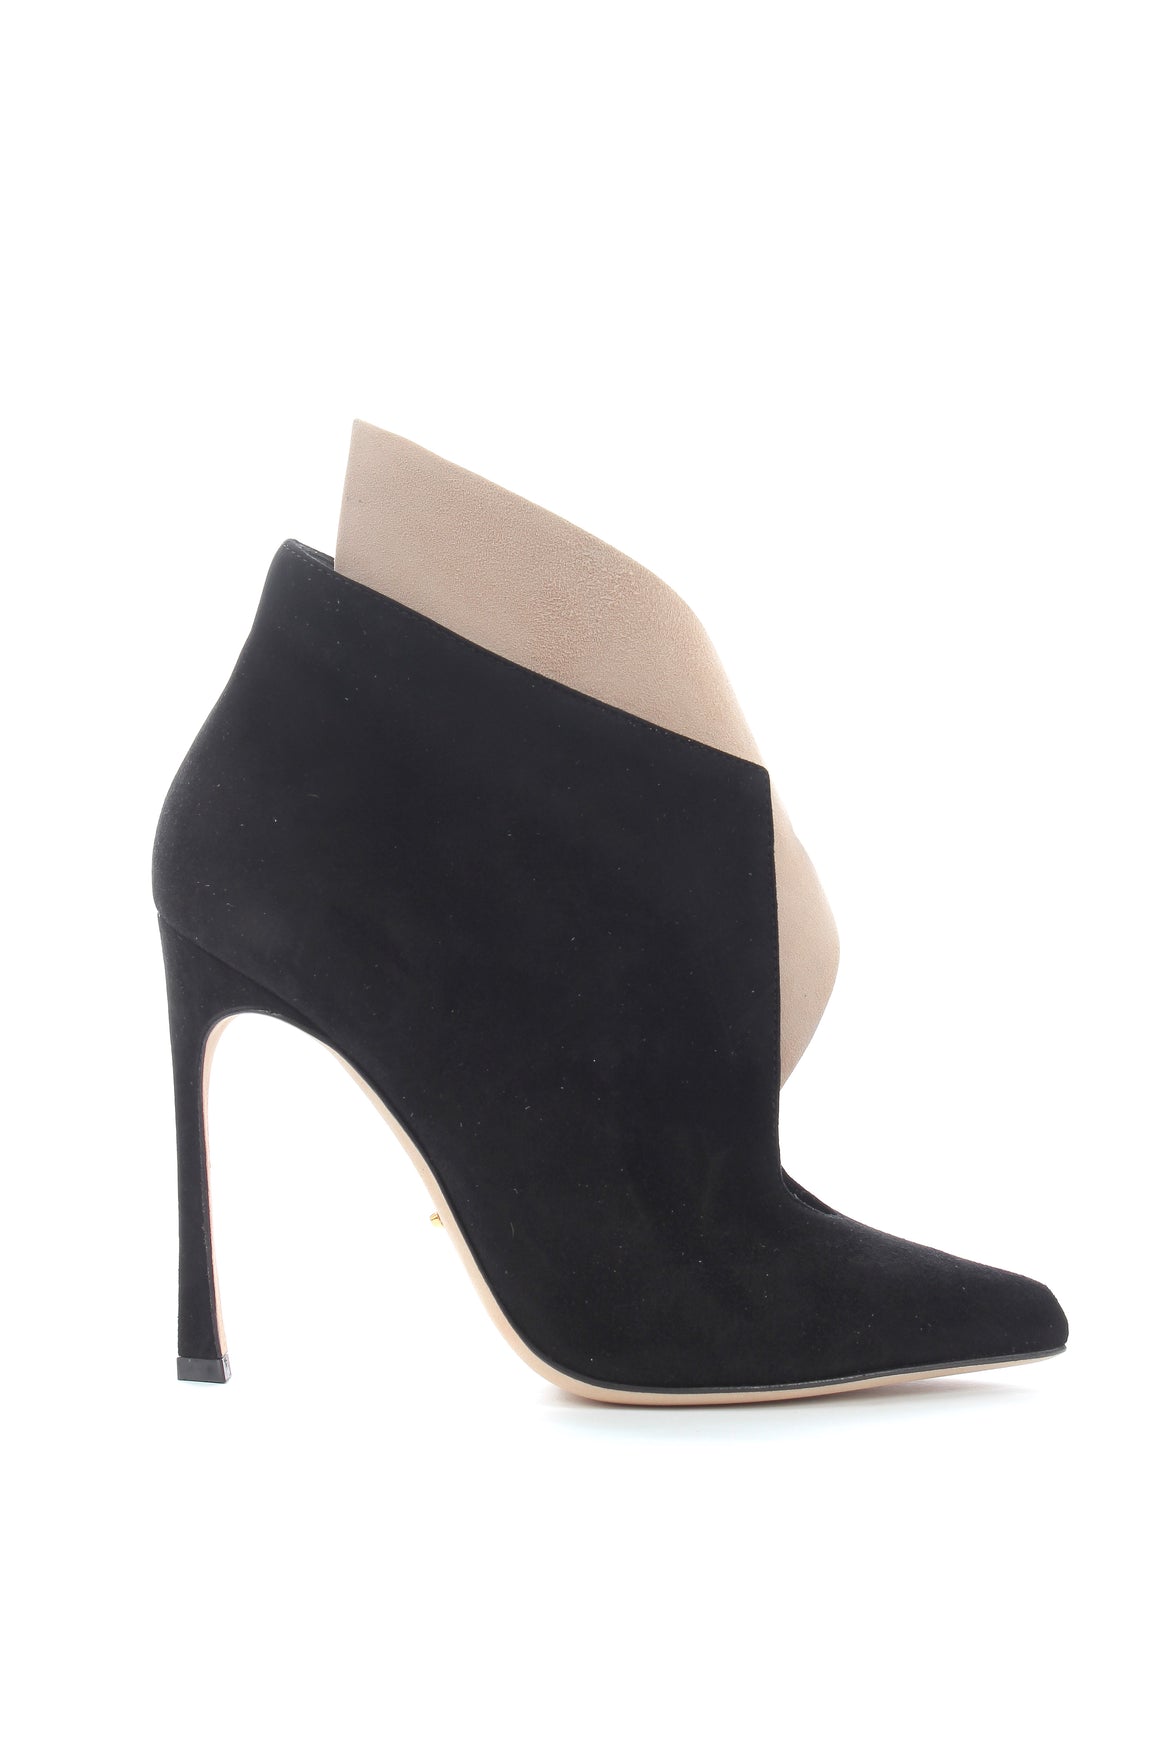 Sergio Rossi Two-Tone Suede Ankle Boots